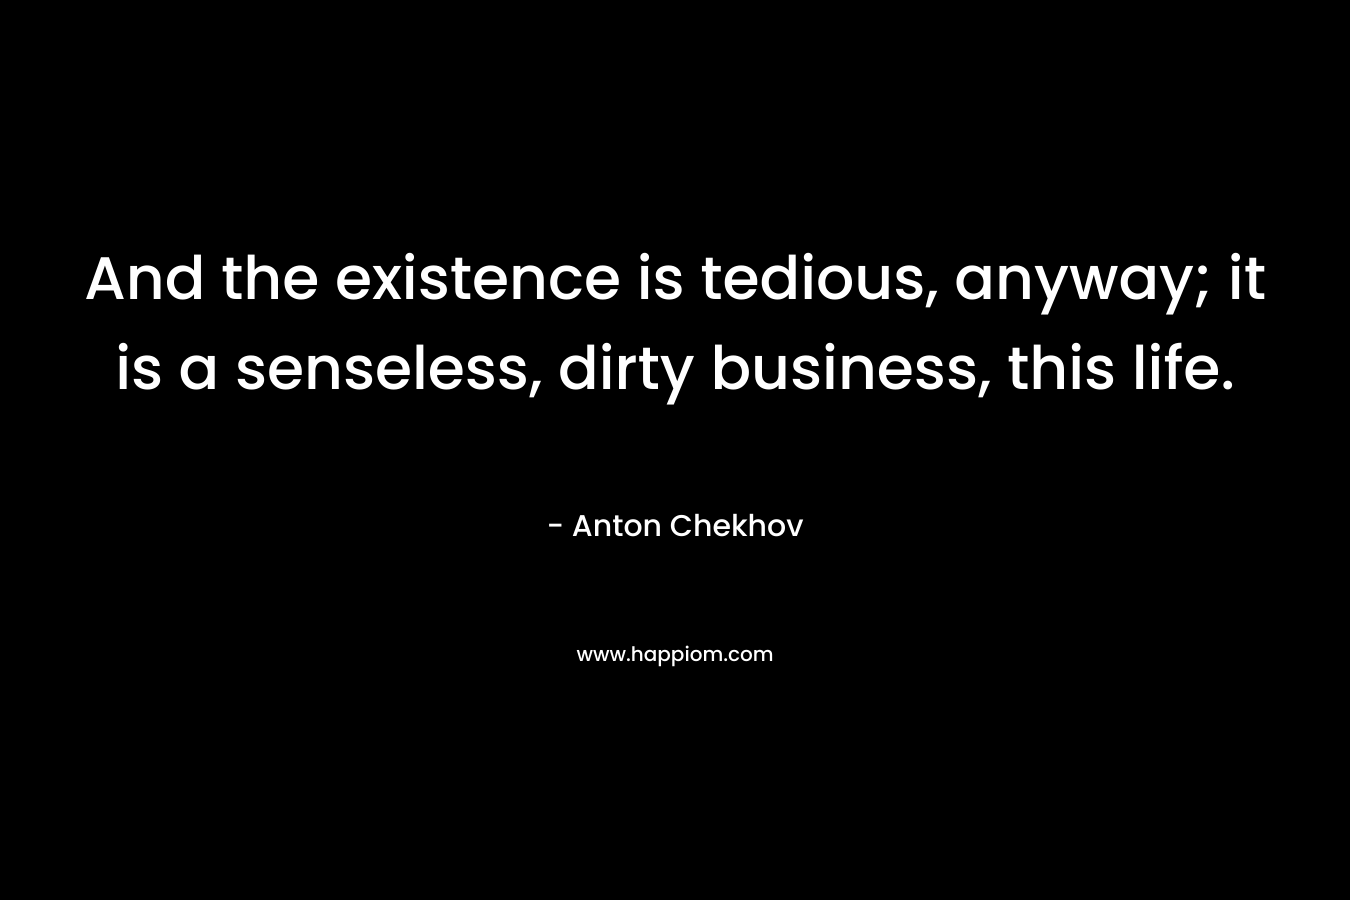 And the existence is tedious, anyway; it is a senseless, dirty business, this life. – Anton Chekhov